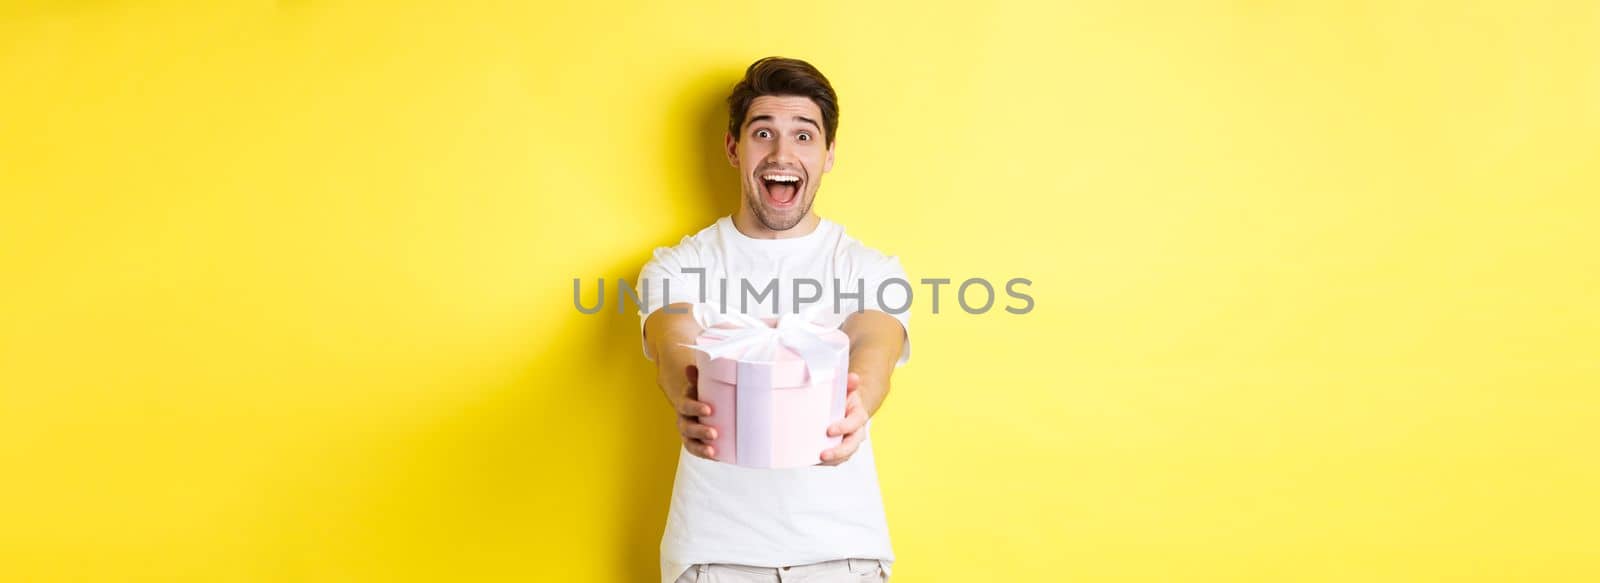 Concept of holidays and celebration. Happy man wishing happy new year, giving you gift, standing over yellow background.